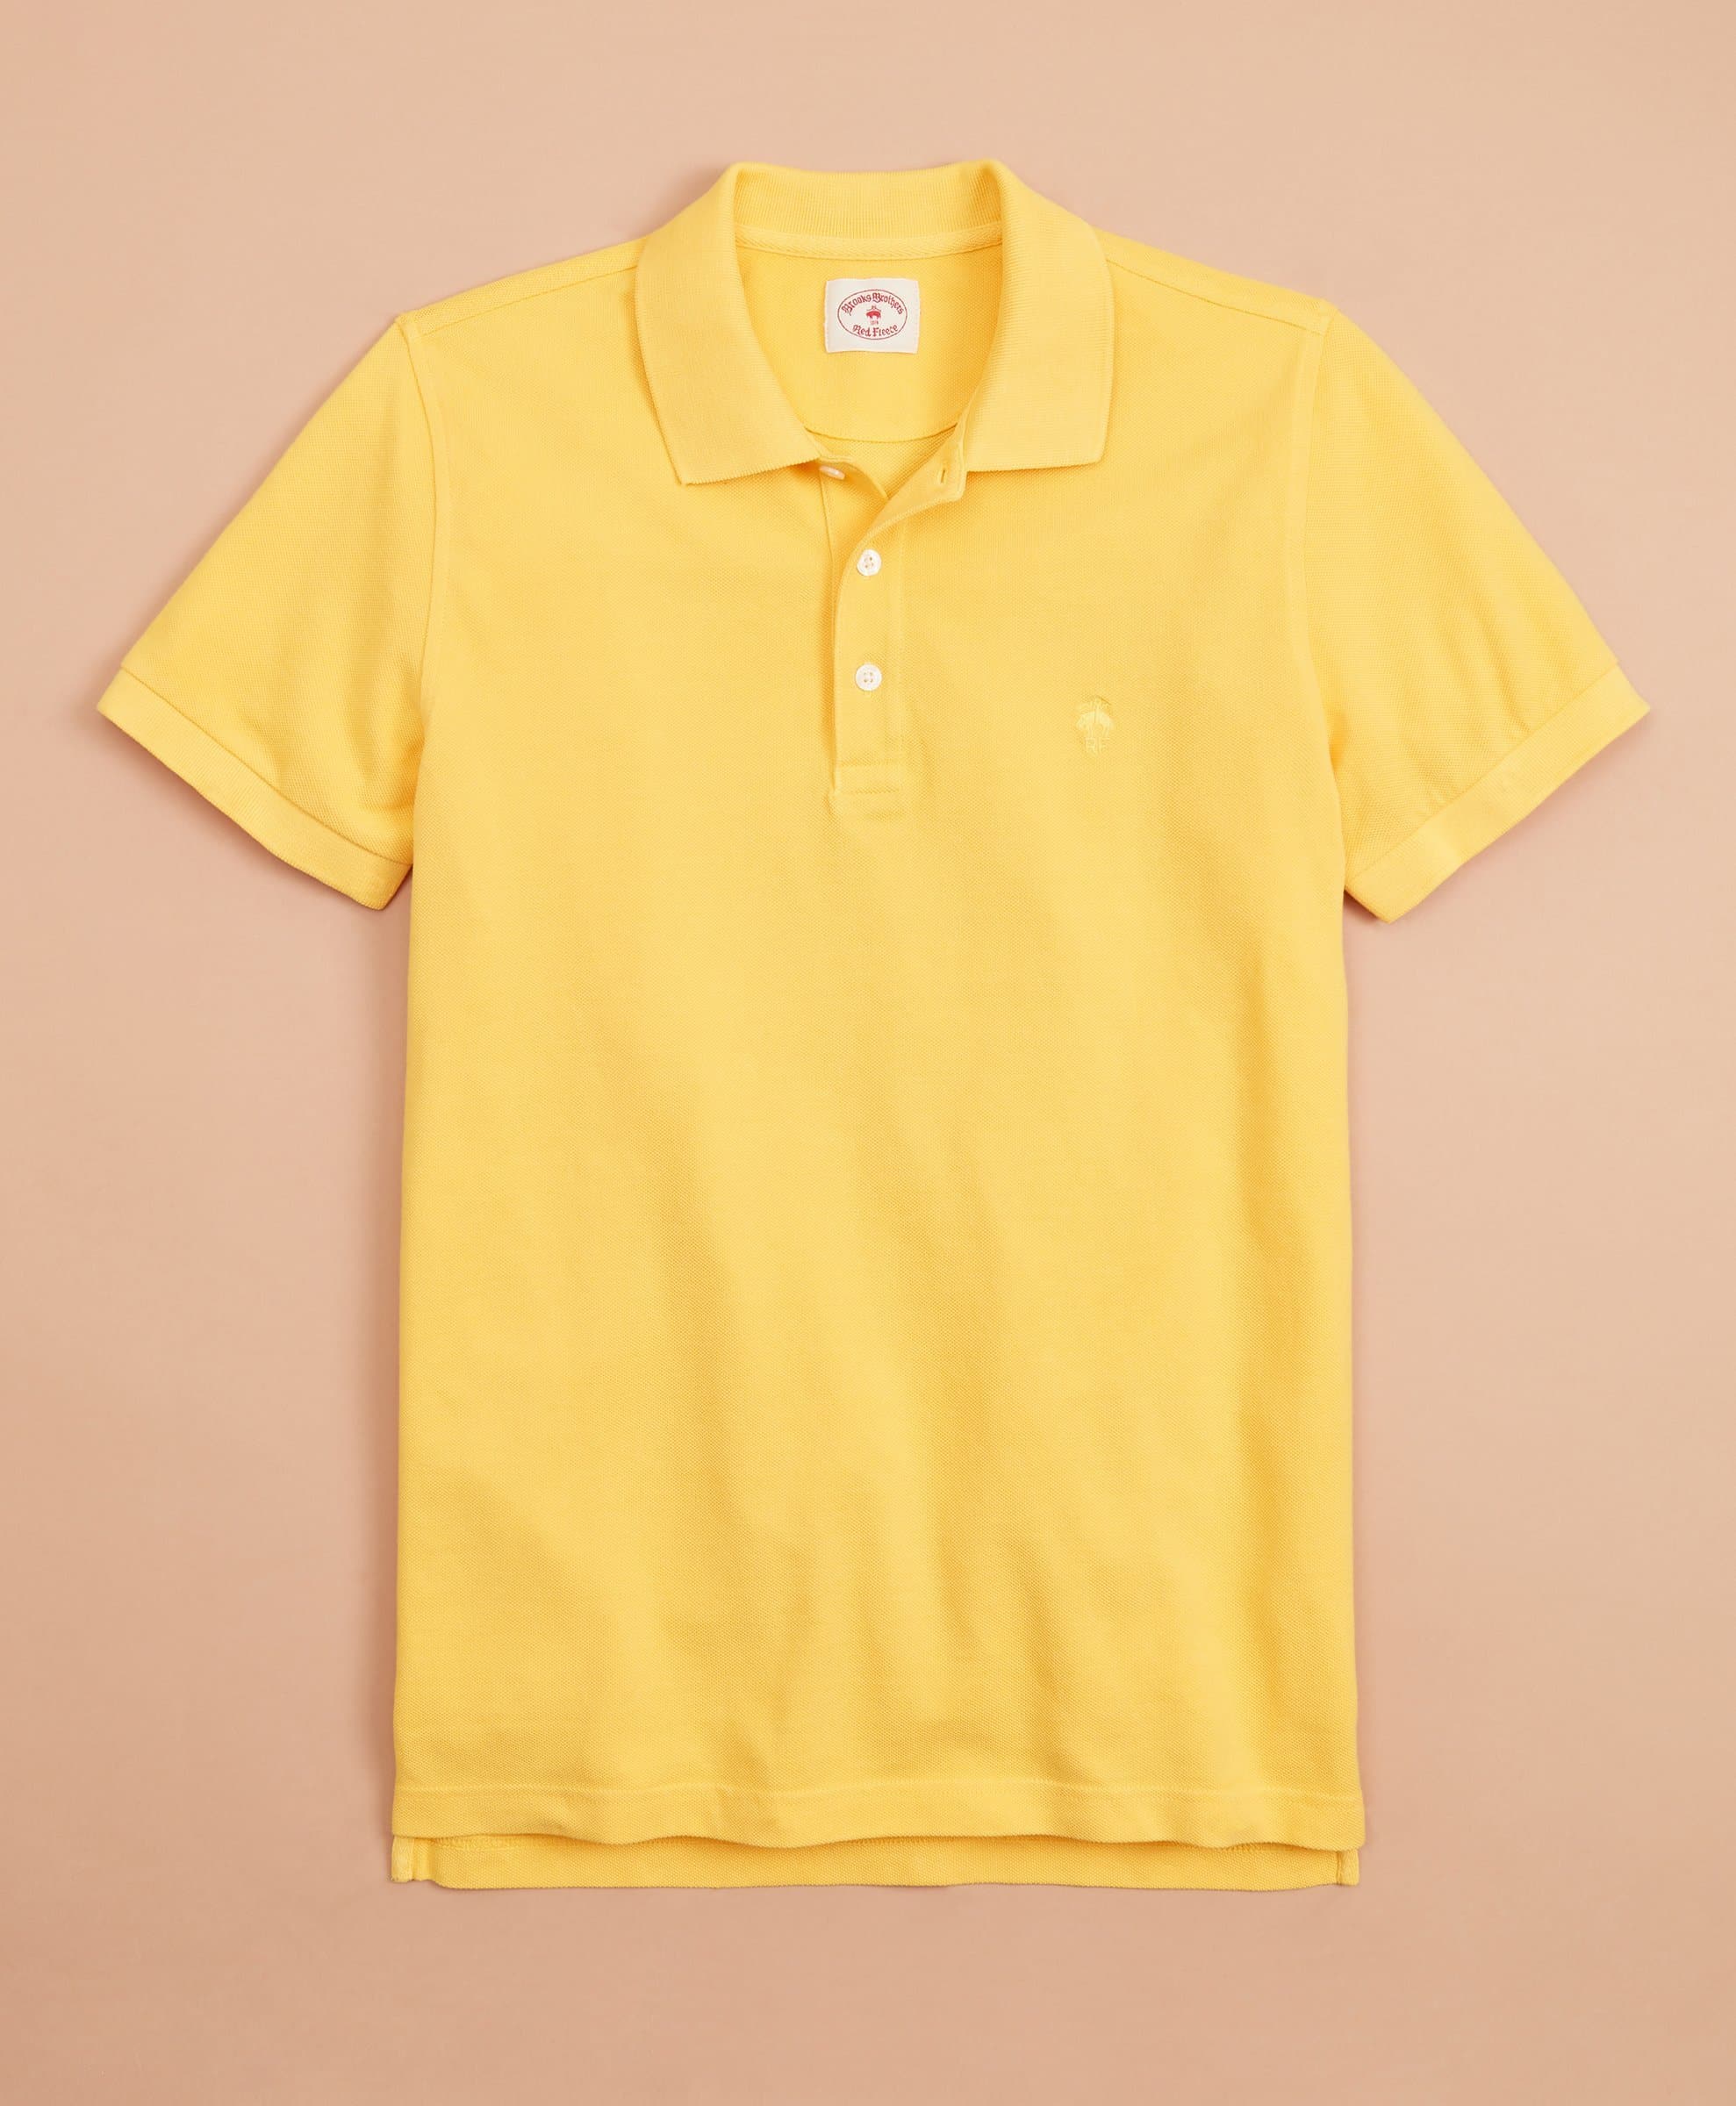 Brooks-Brothers-Garment-Dyed-Cotton-Pique-Polo-Shirt-Bright-Yellow-000100152917-077